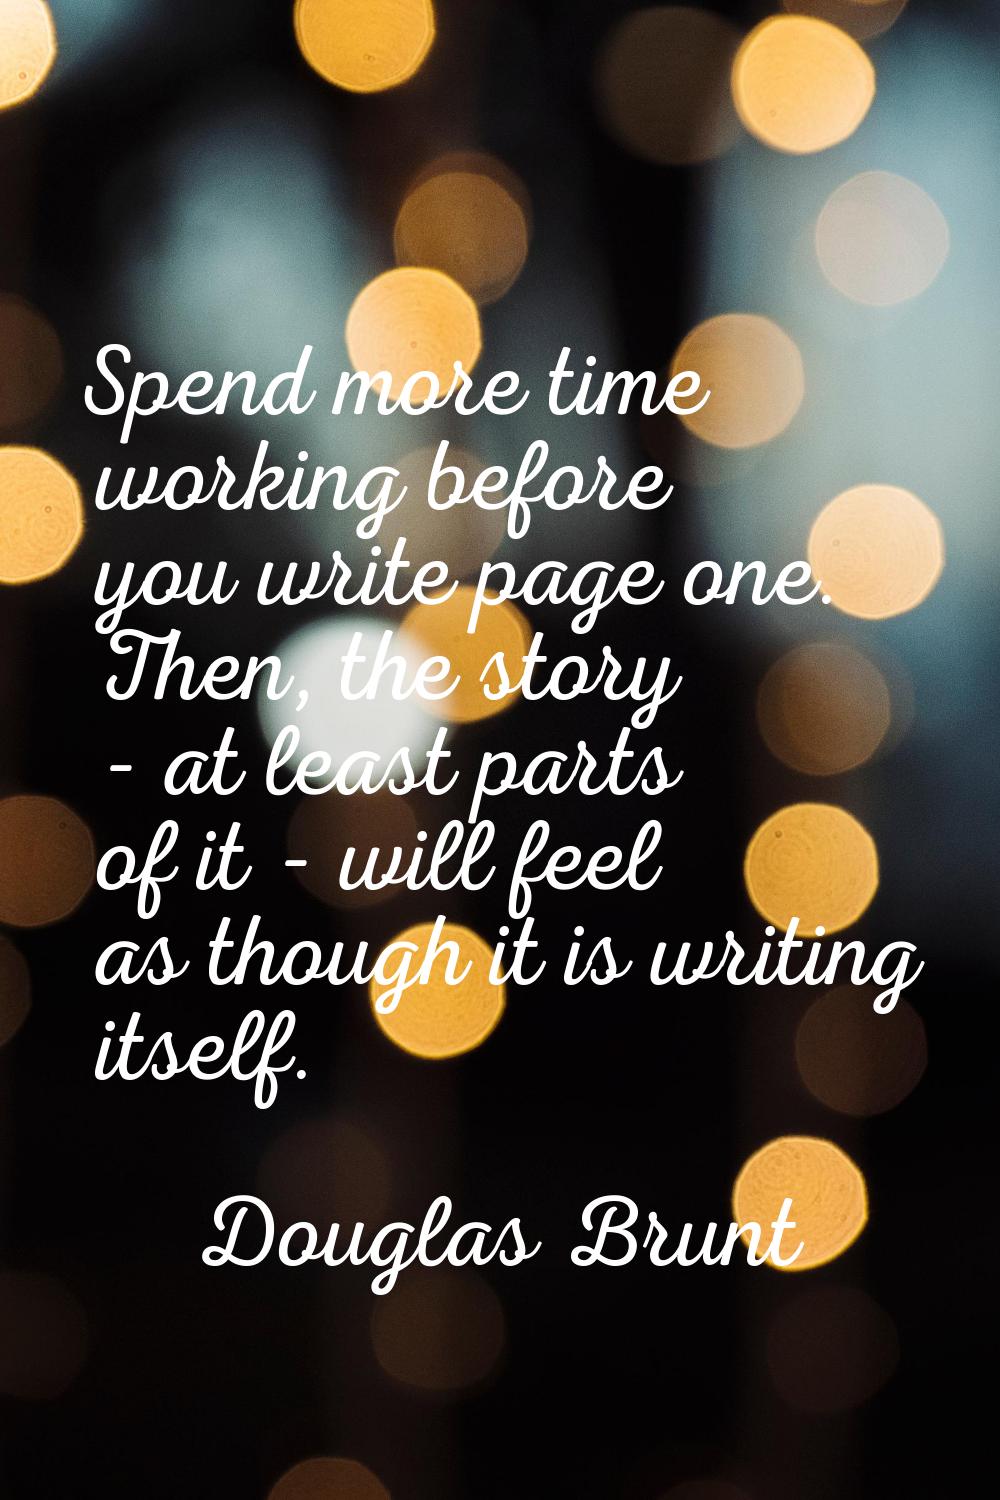 Spend more time working before you write page one. Then, the story - at least parts of it - will fe